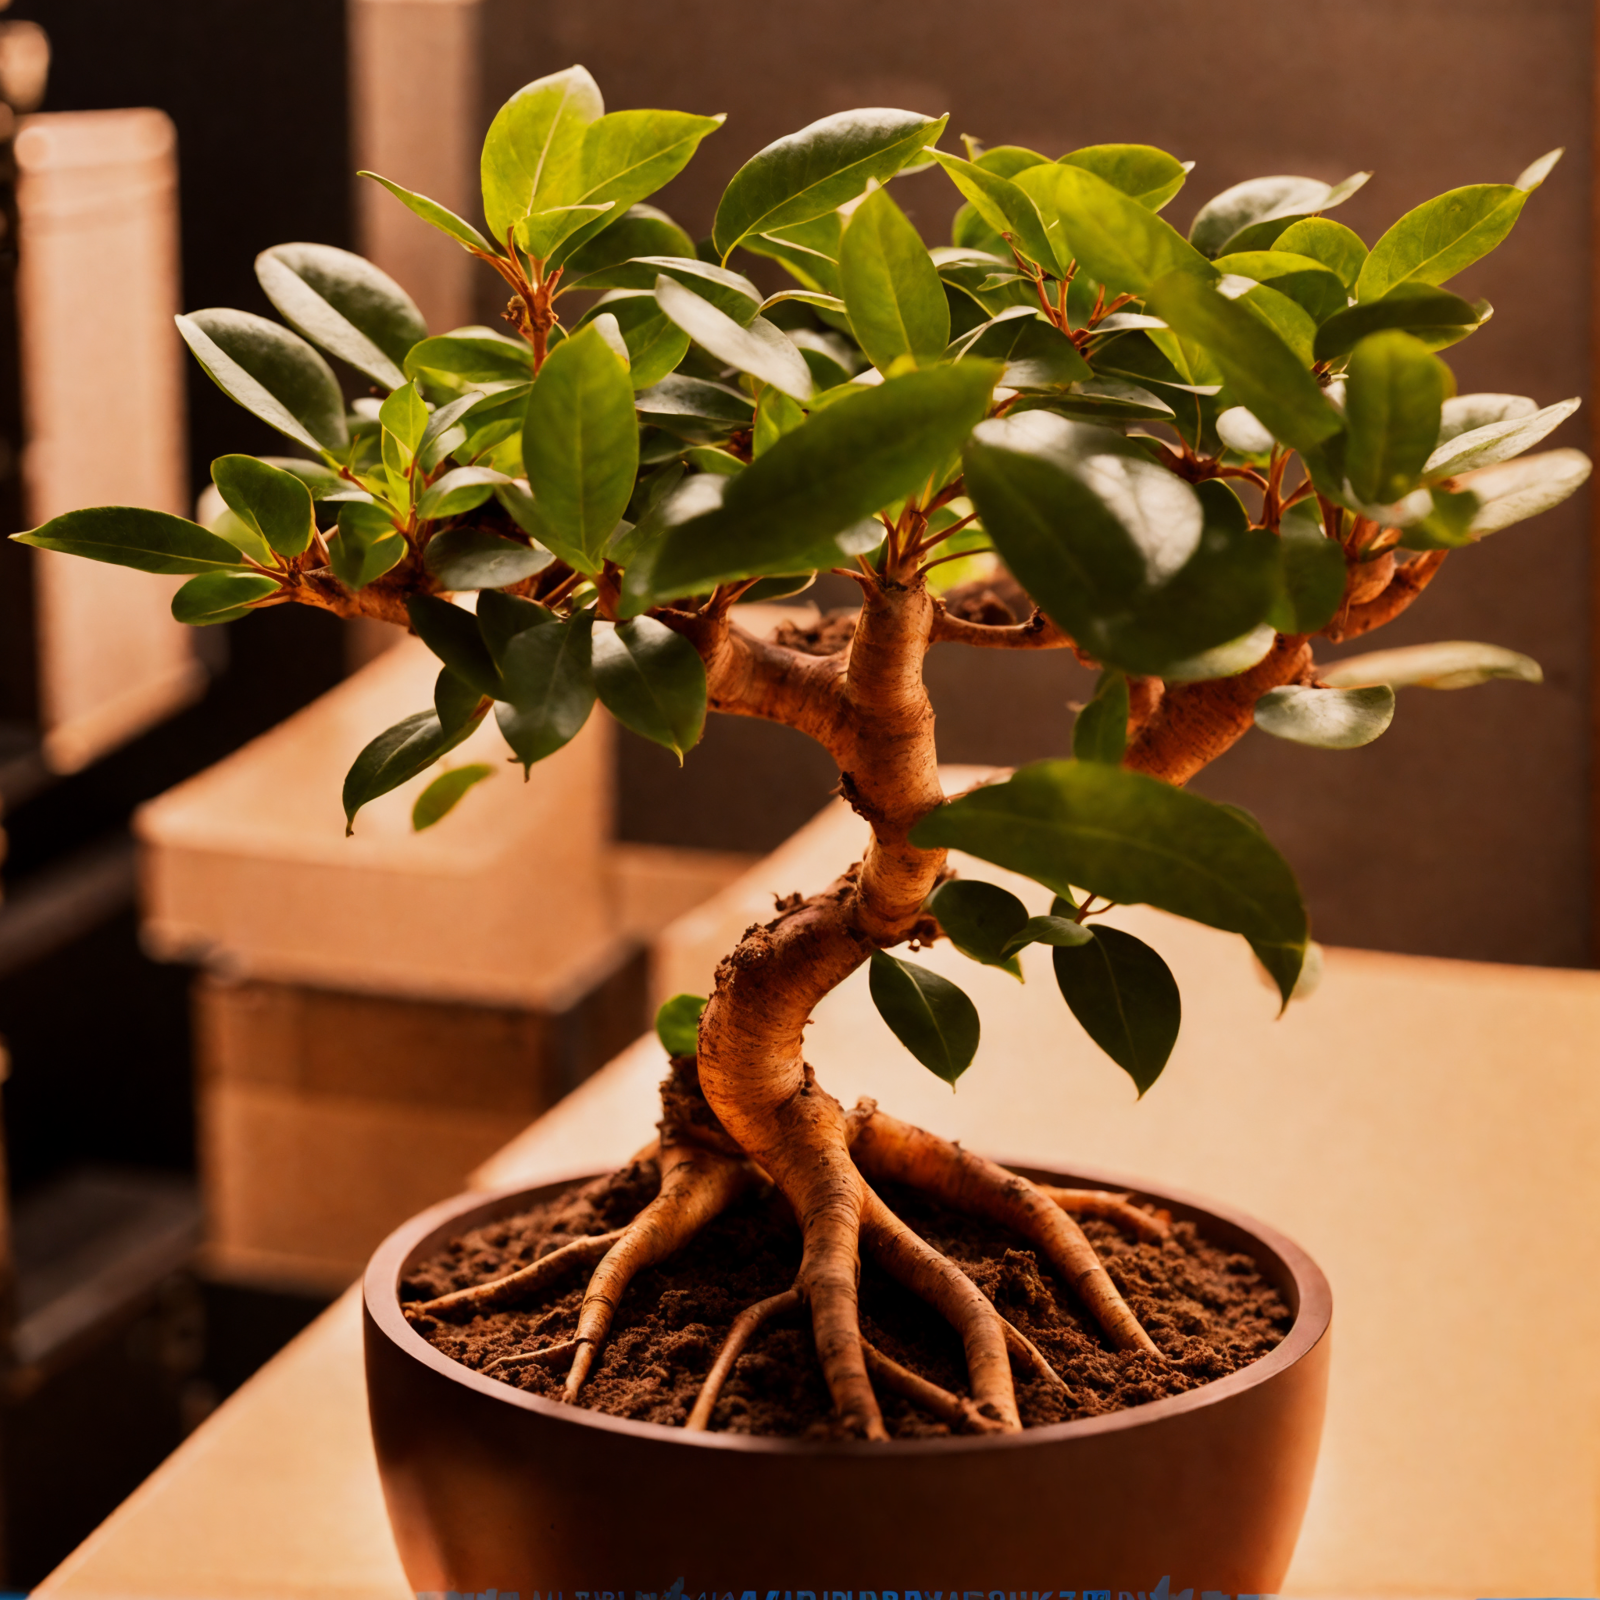 Ficus microcarpa in a bowl planter with leaves, set against a dark background with clear, neutral lighting.